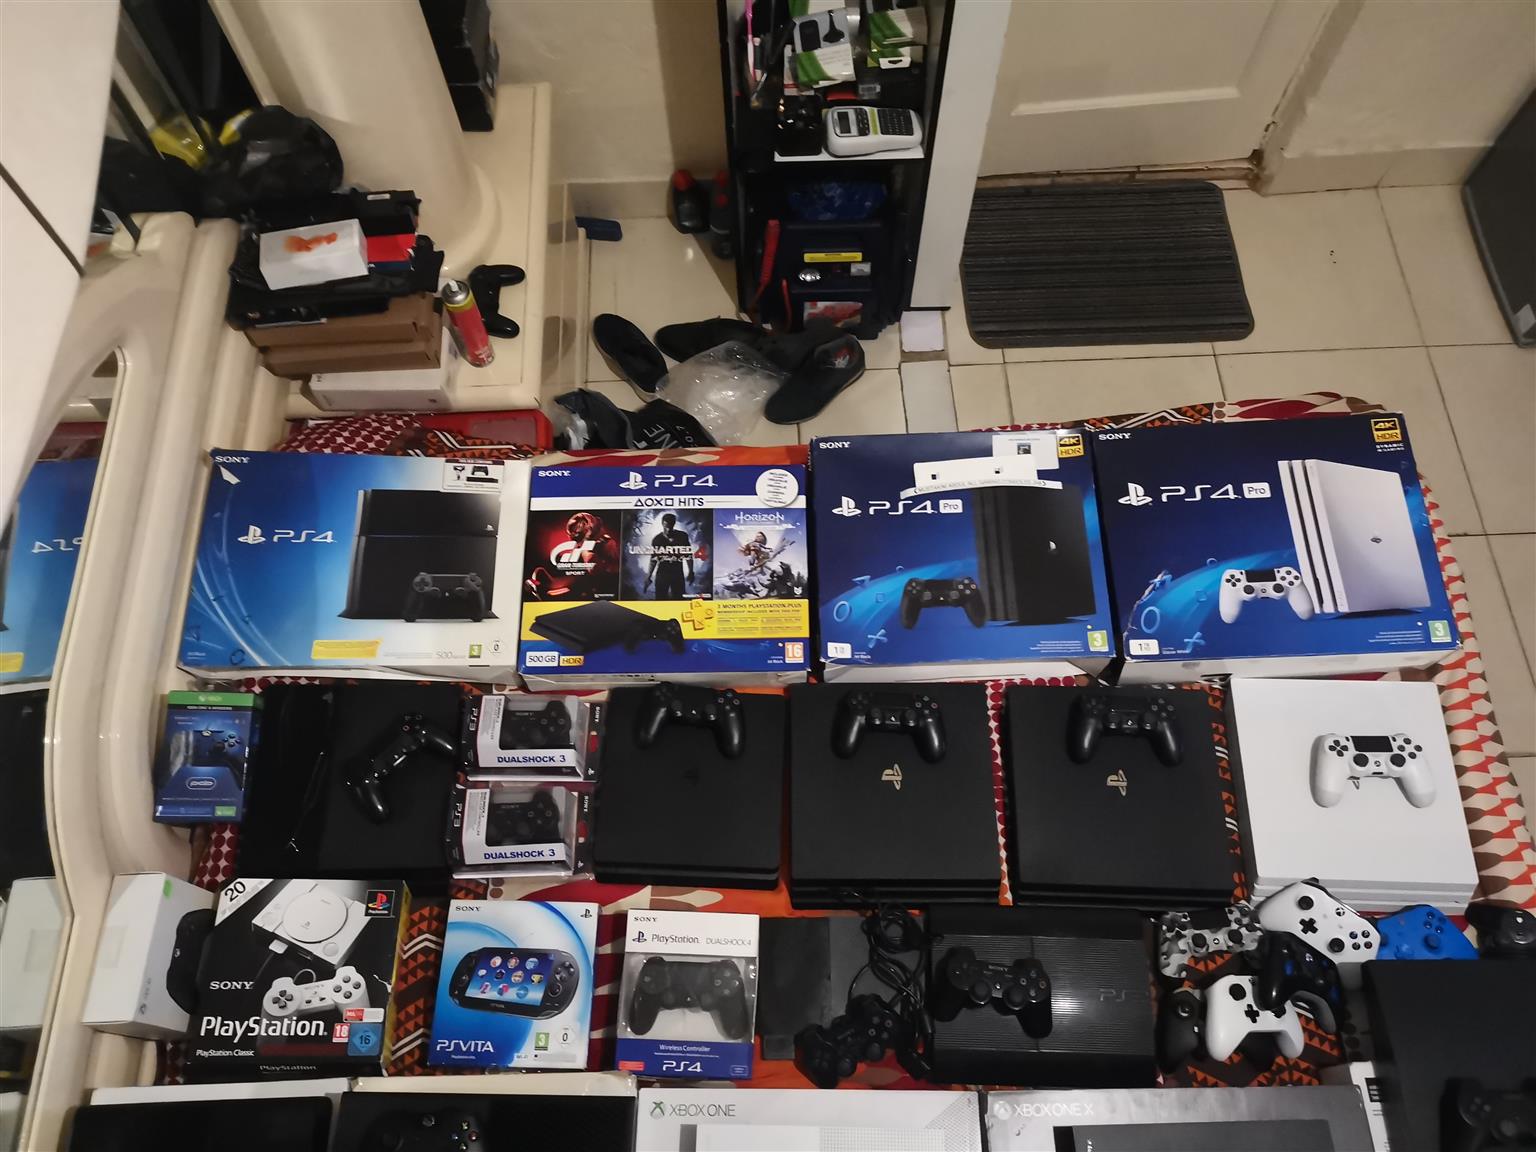 All Gaming Consoles JHB 2022 Pricelist 1. Ps4 R4500 2. Ps4 slim R4999 3. Ps4 pro